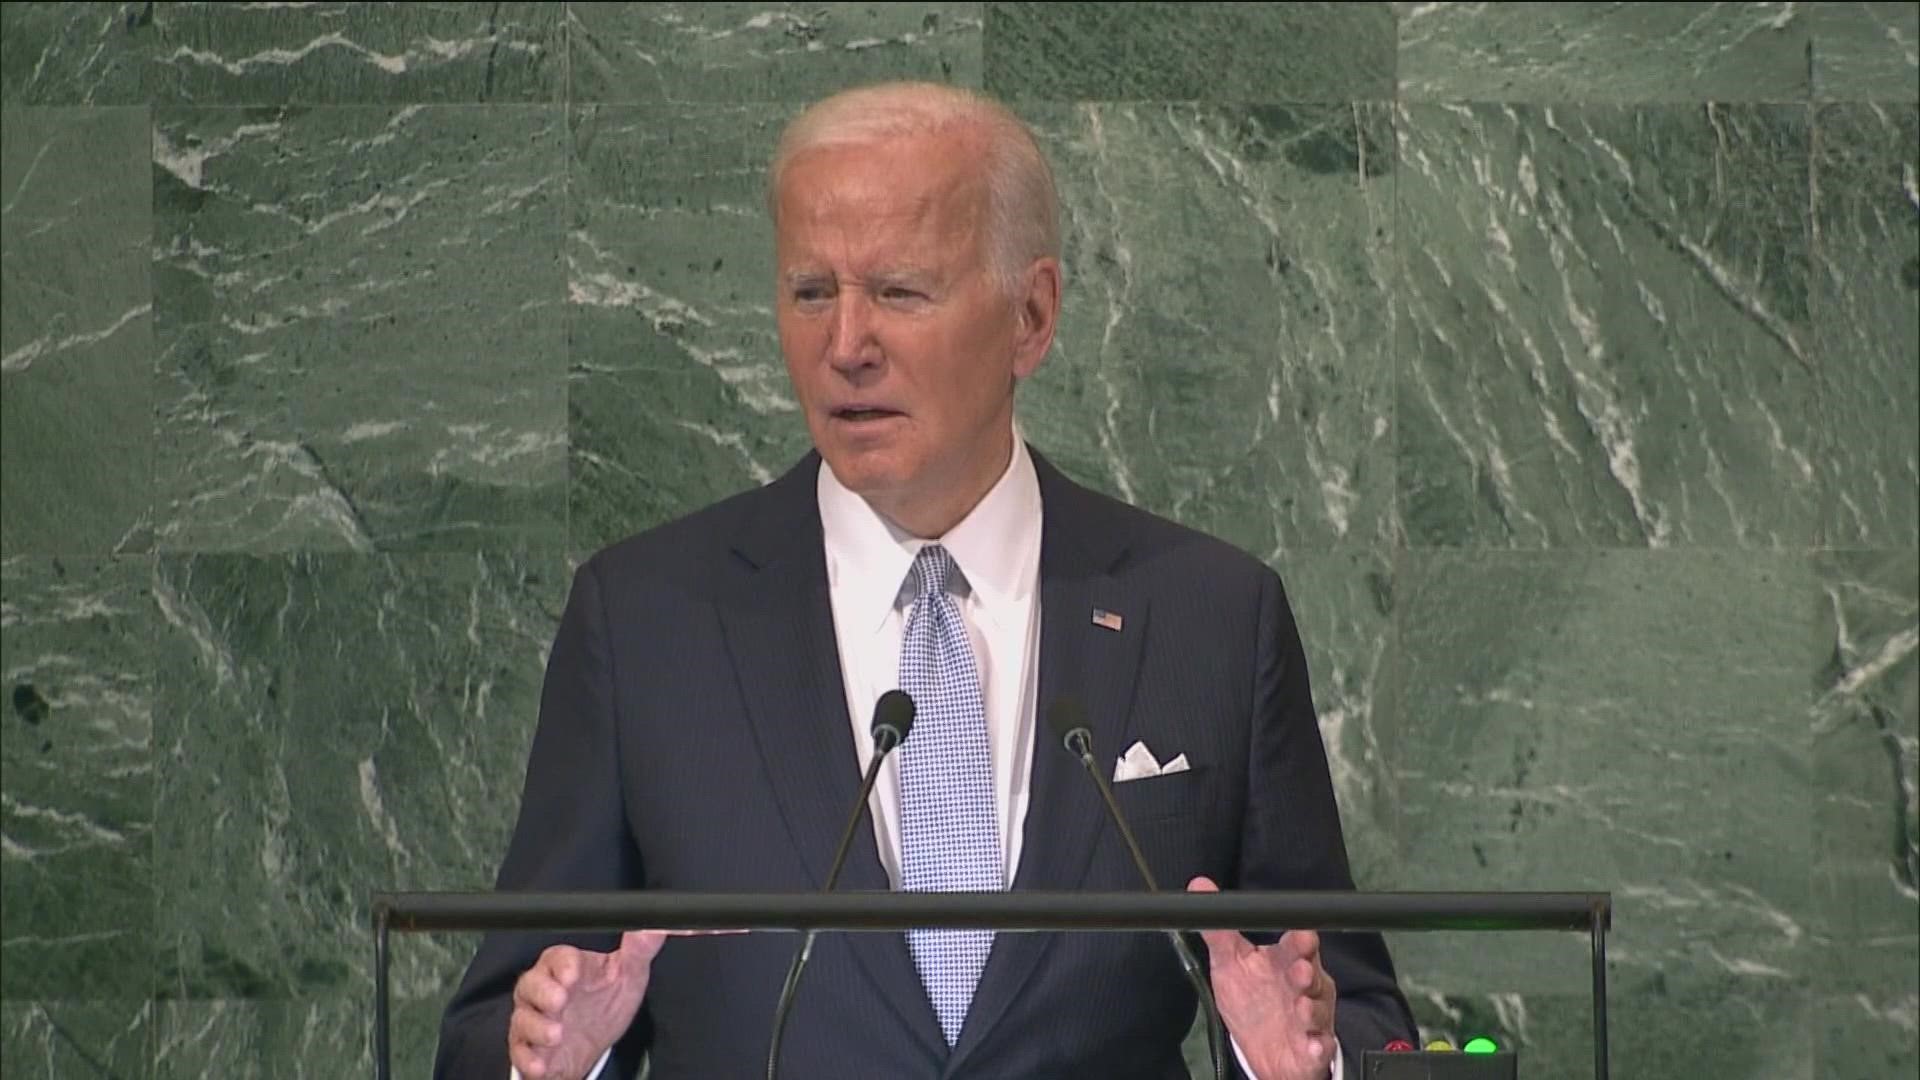 Biden called on all nations to speak out against Russia's “brutal, needless war” and to bolster Ukraine's effort to defend itself.